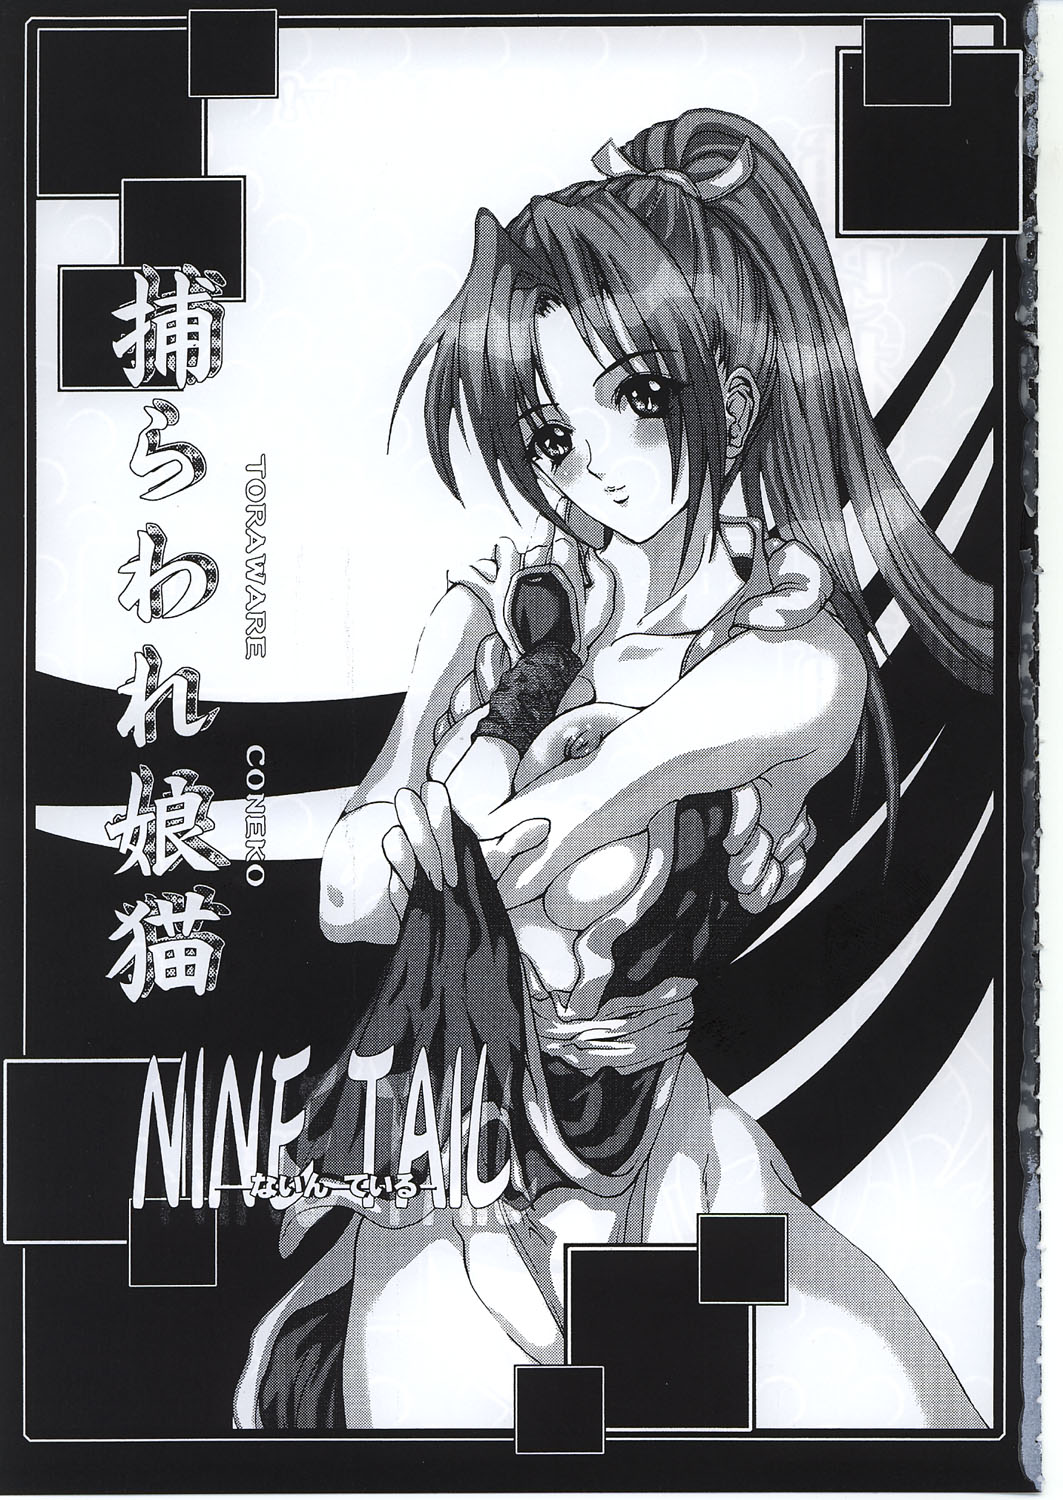 (C62) [NINE TAIL (GRIFON, YaO.)] Toraware Koneko (King of Fighters, Dead or Alive) page 1 full